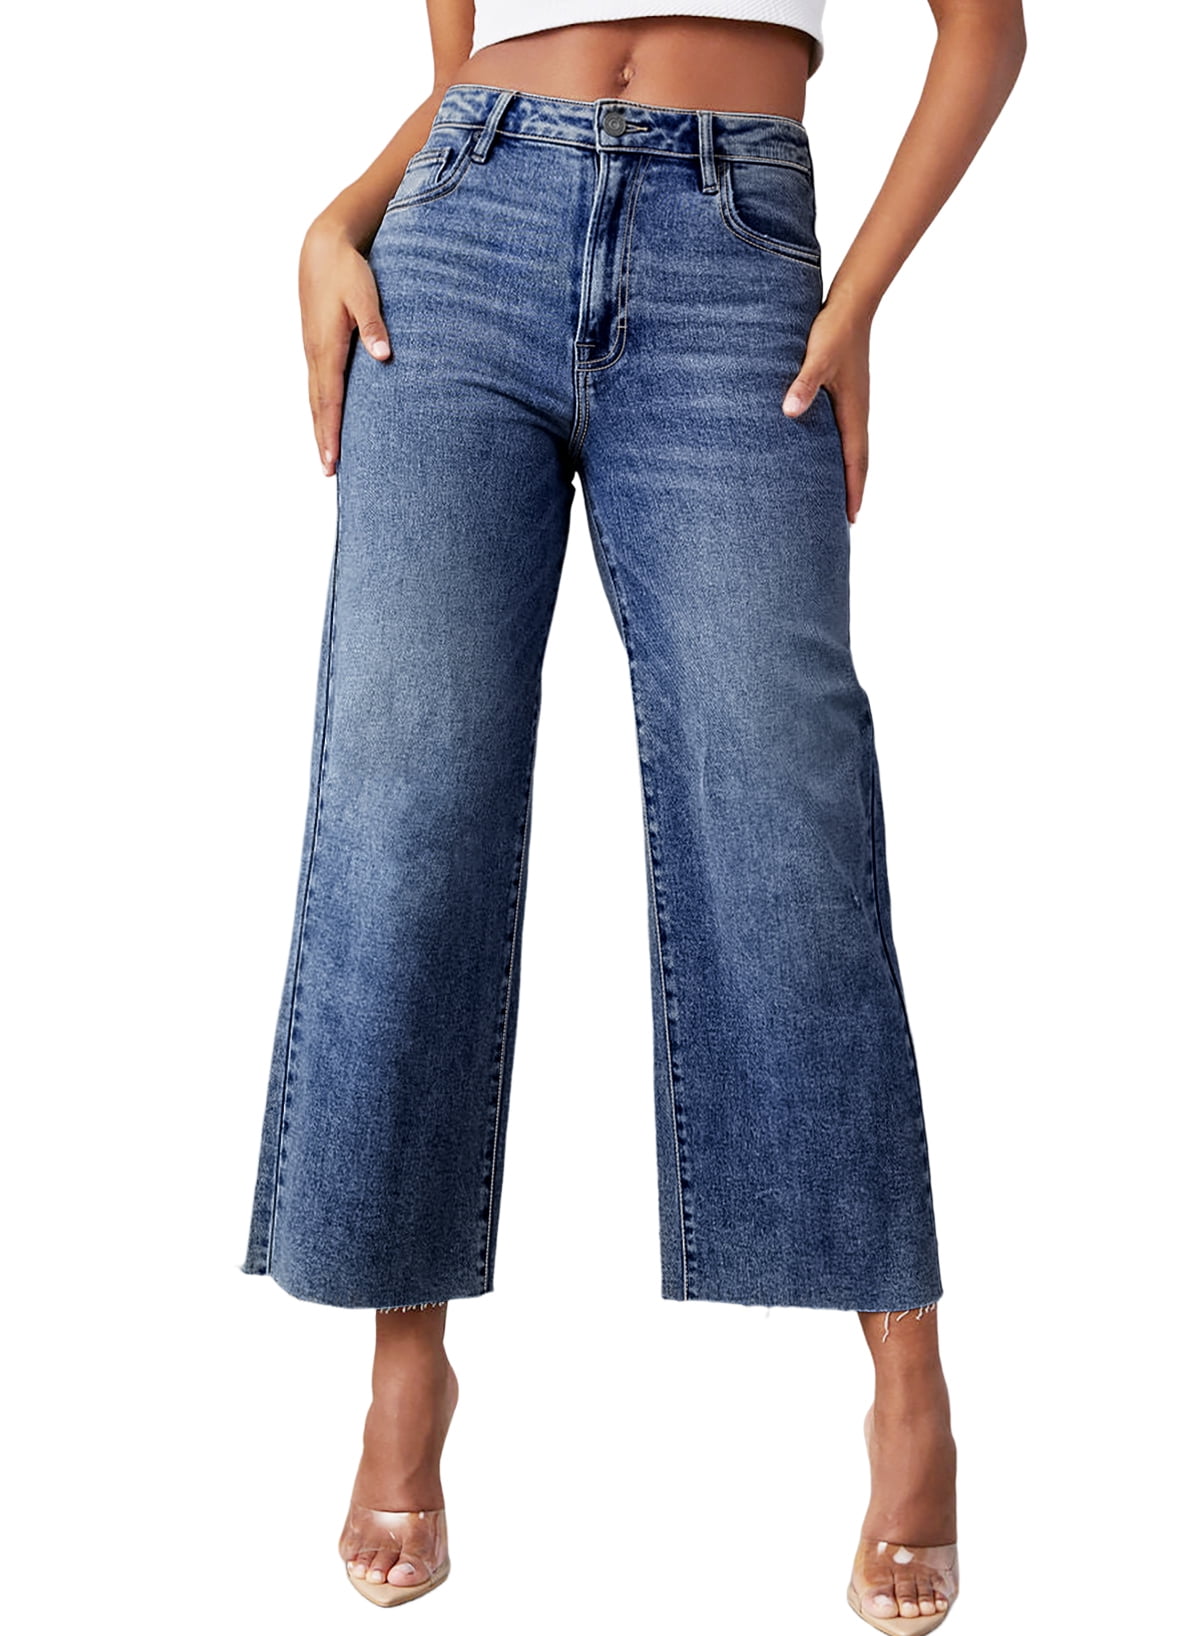 Thick Denim Women's Loose High Waisted Button Down Trousers Wide Leg Jeans  16 Jean 